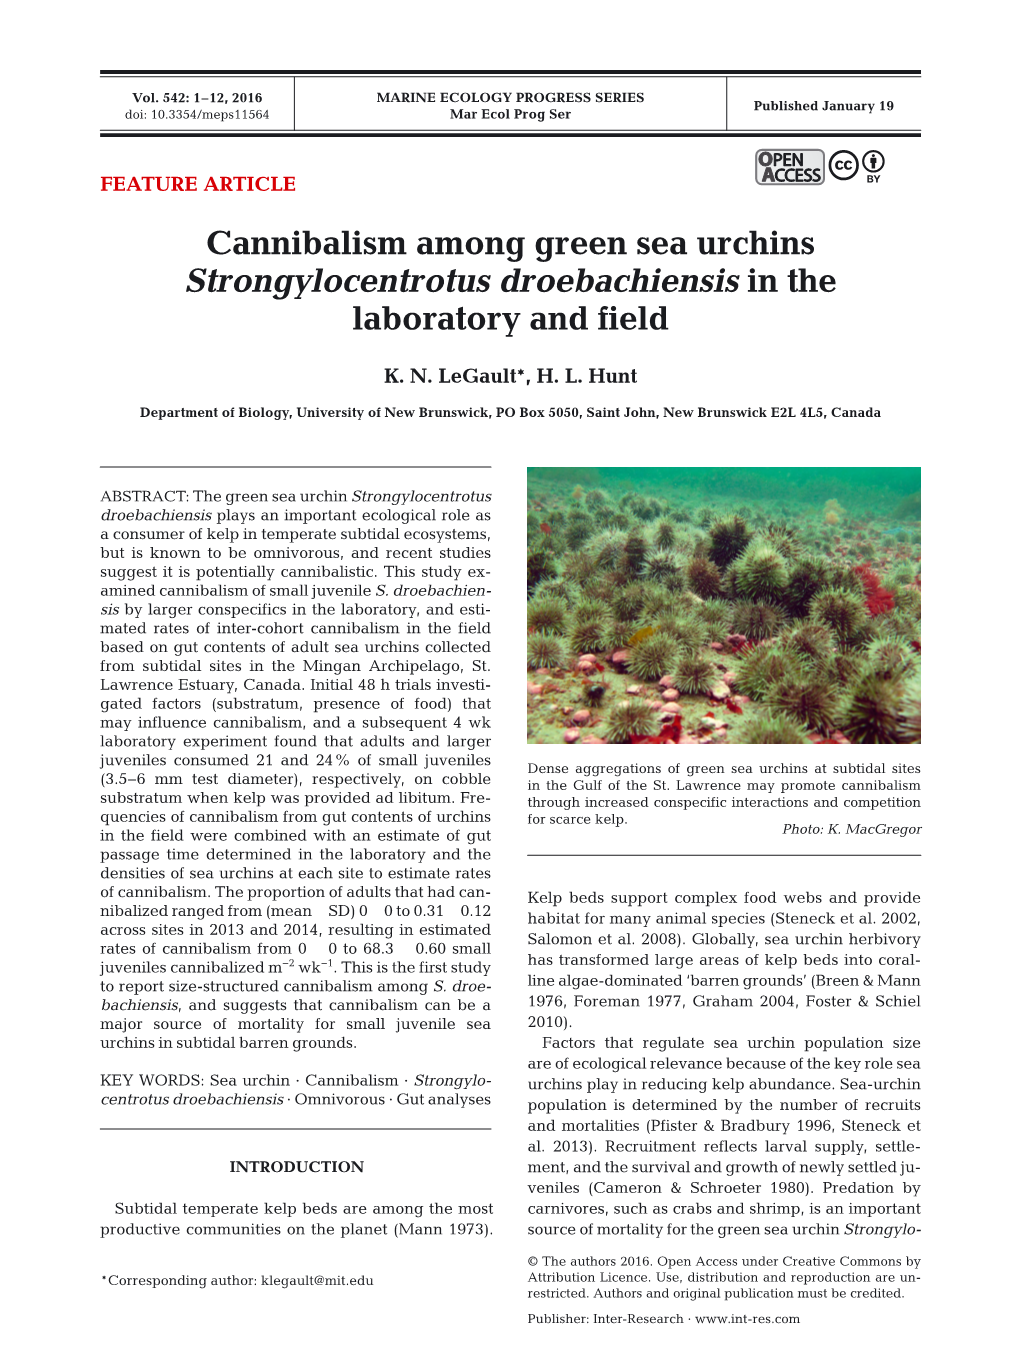 Cannibalism Among Green Sea Urchins Strongylocentrotus Droebachiensis in the Laboratory and Field